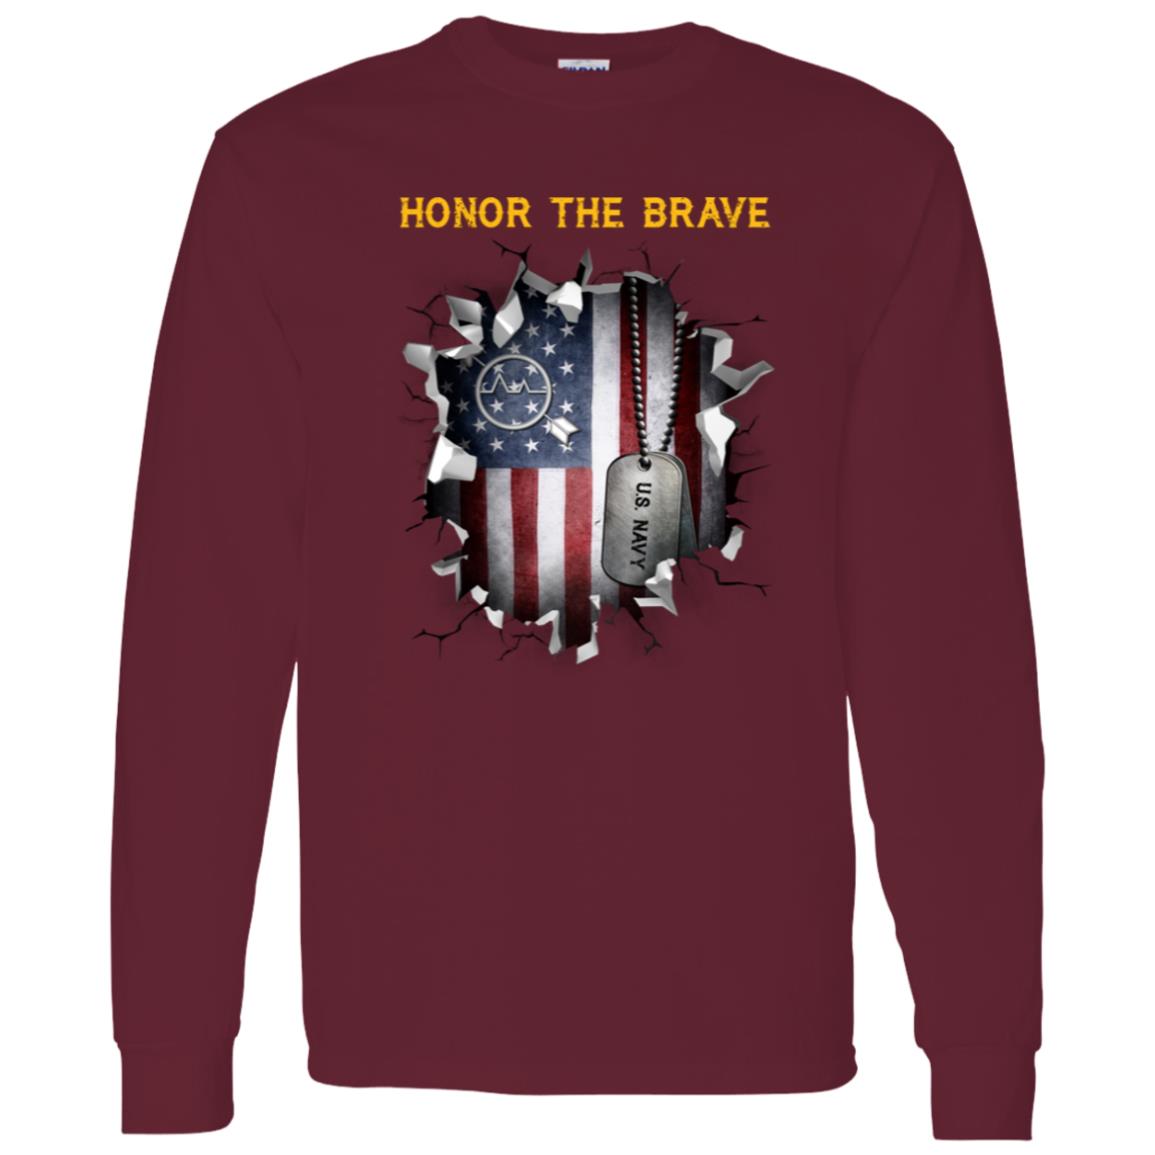 U.S Navy Operations specialist Navy OS - Honor The Brave Front Shirt